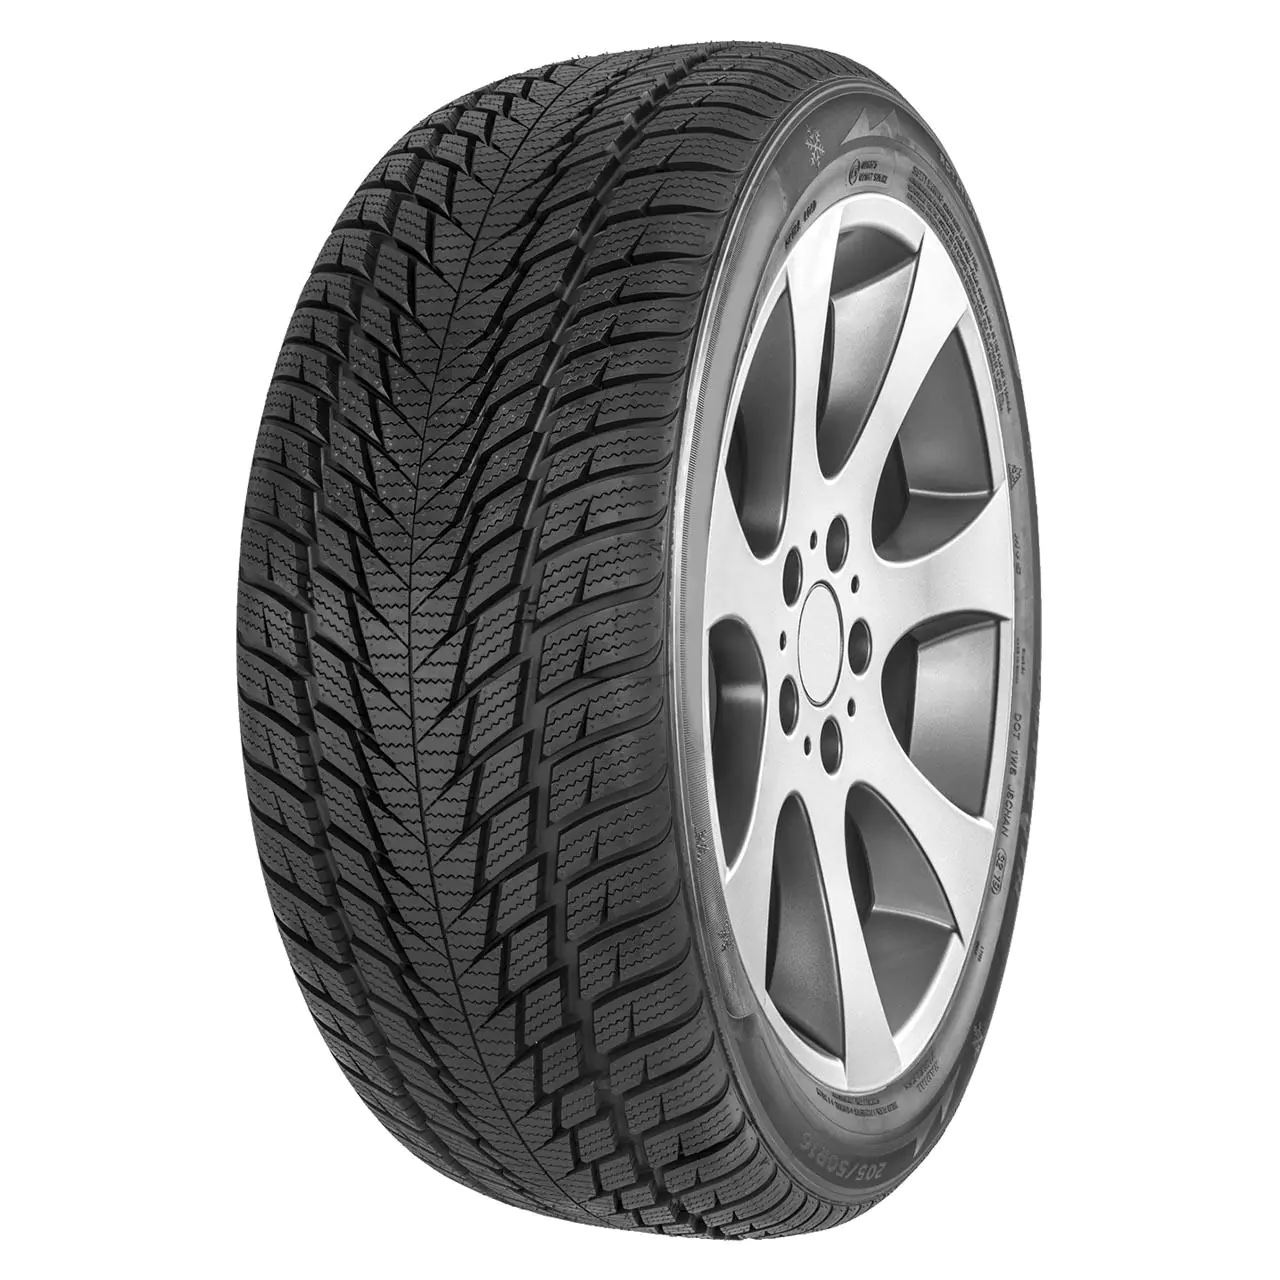 Gomme Autovettura Fortuna 235/50 R18 101V GOWIN UHP2 XL M+S Invernale